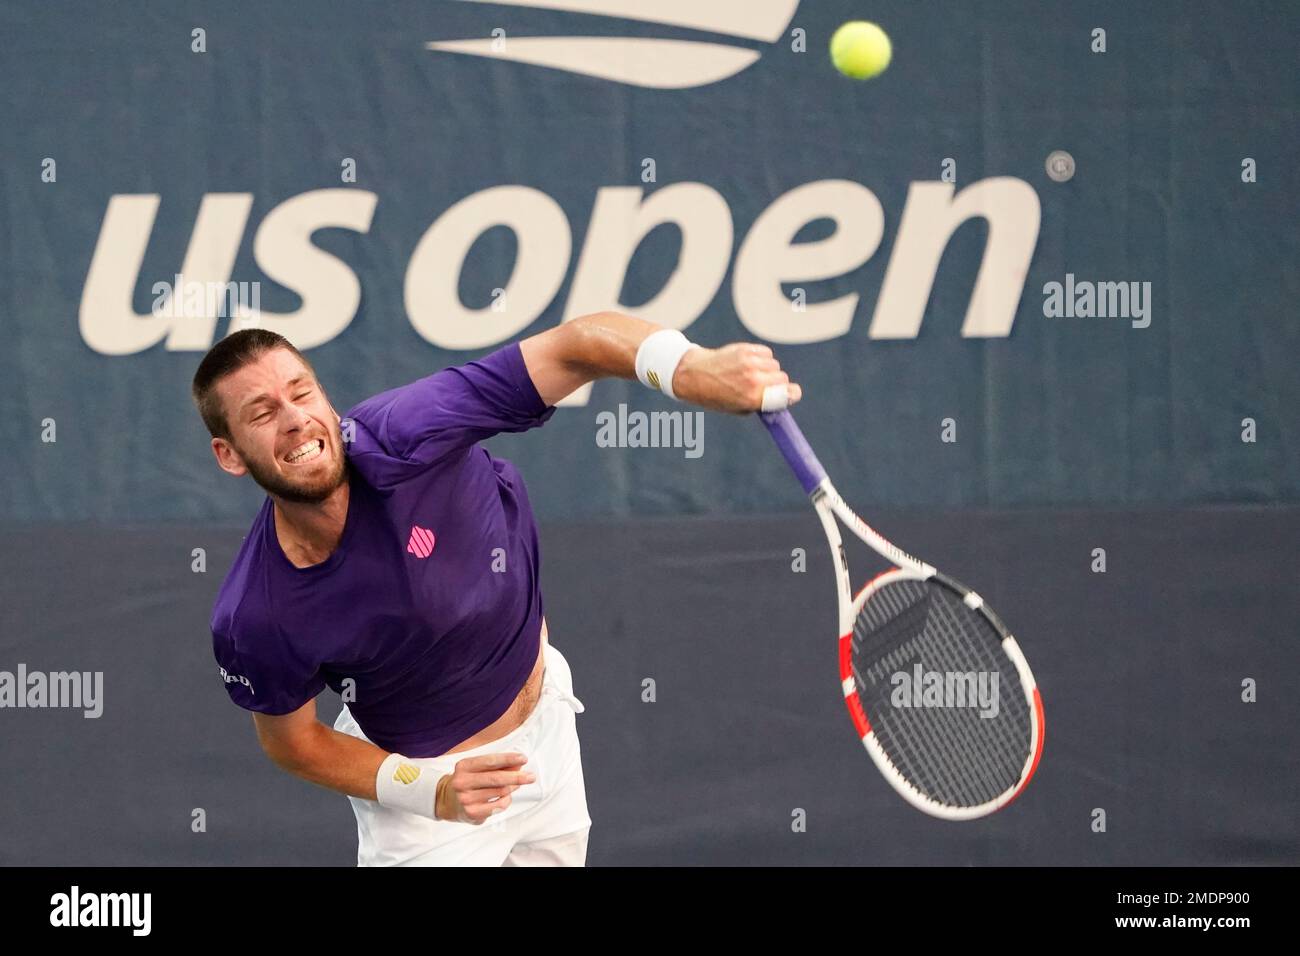 Cameron Norrie, of Britain, serves to Carlos Alcaraz, of Spain, during the first round of the US Open tennis championships, Monday, Aug